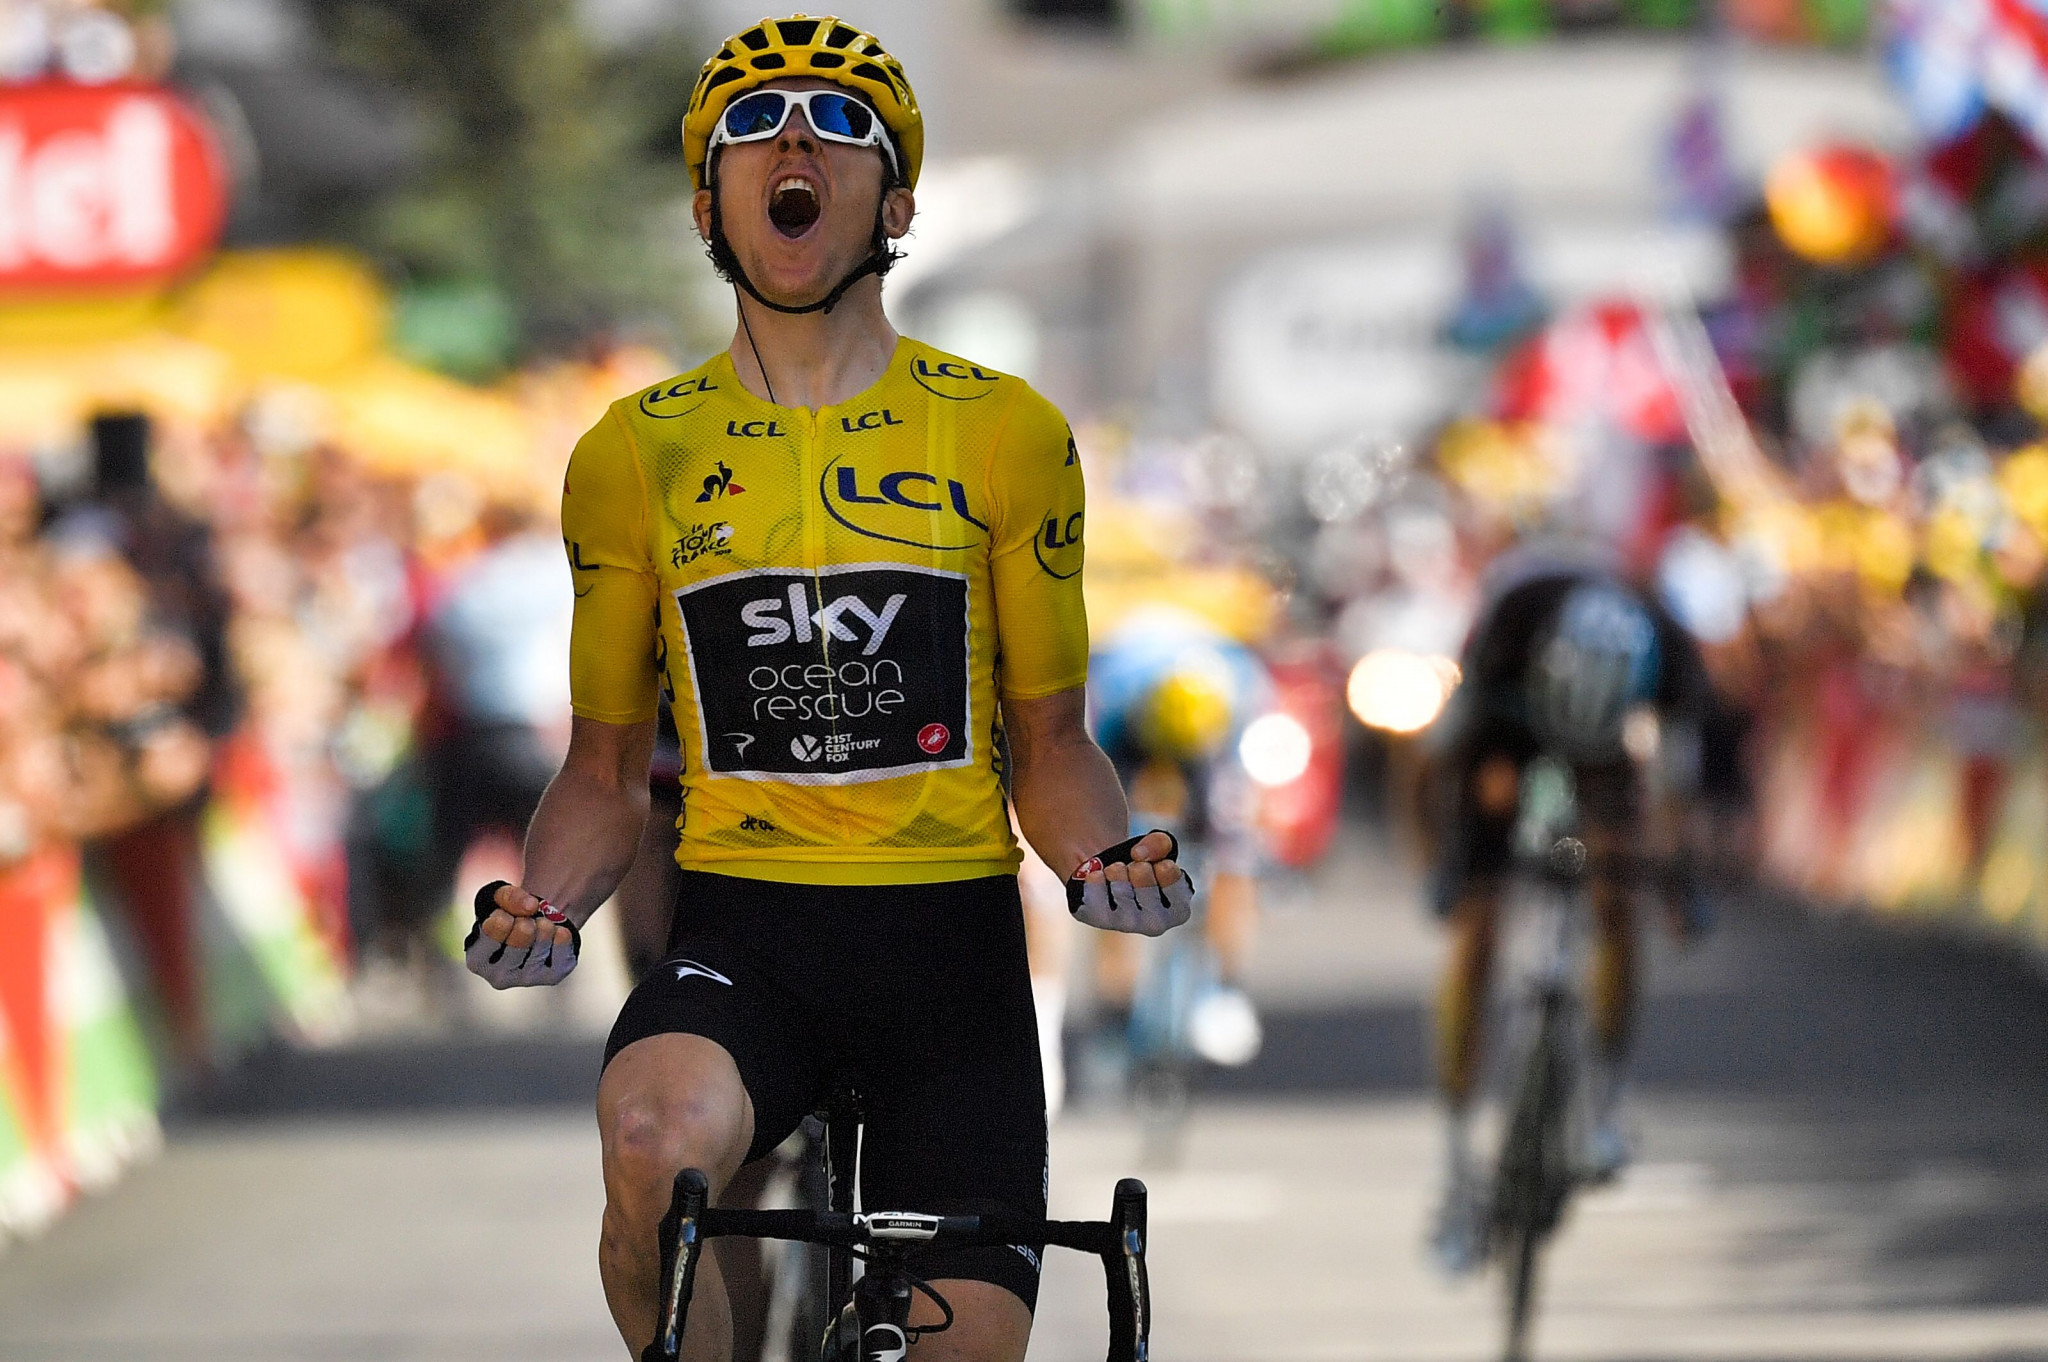 Geraint Thomas won a second consecutive stage at the Tour de France ©Getty Images